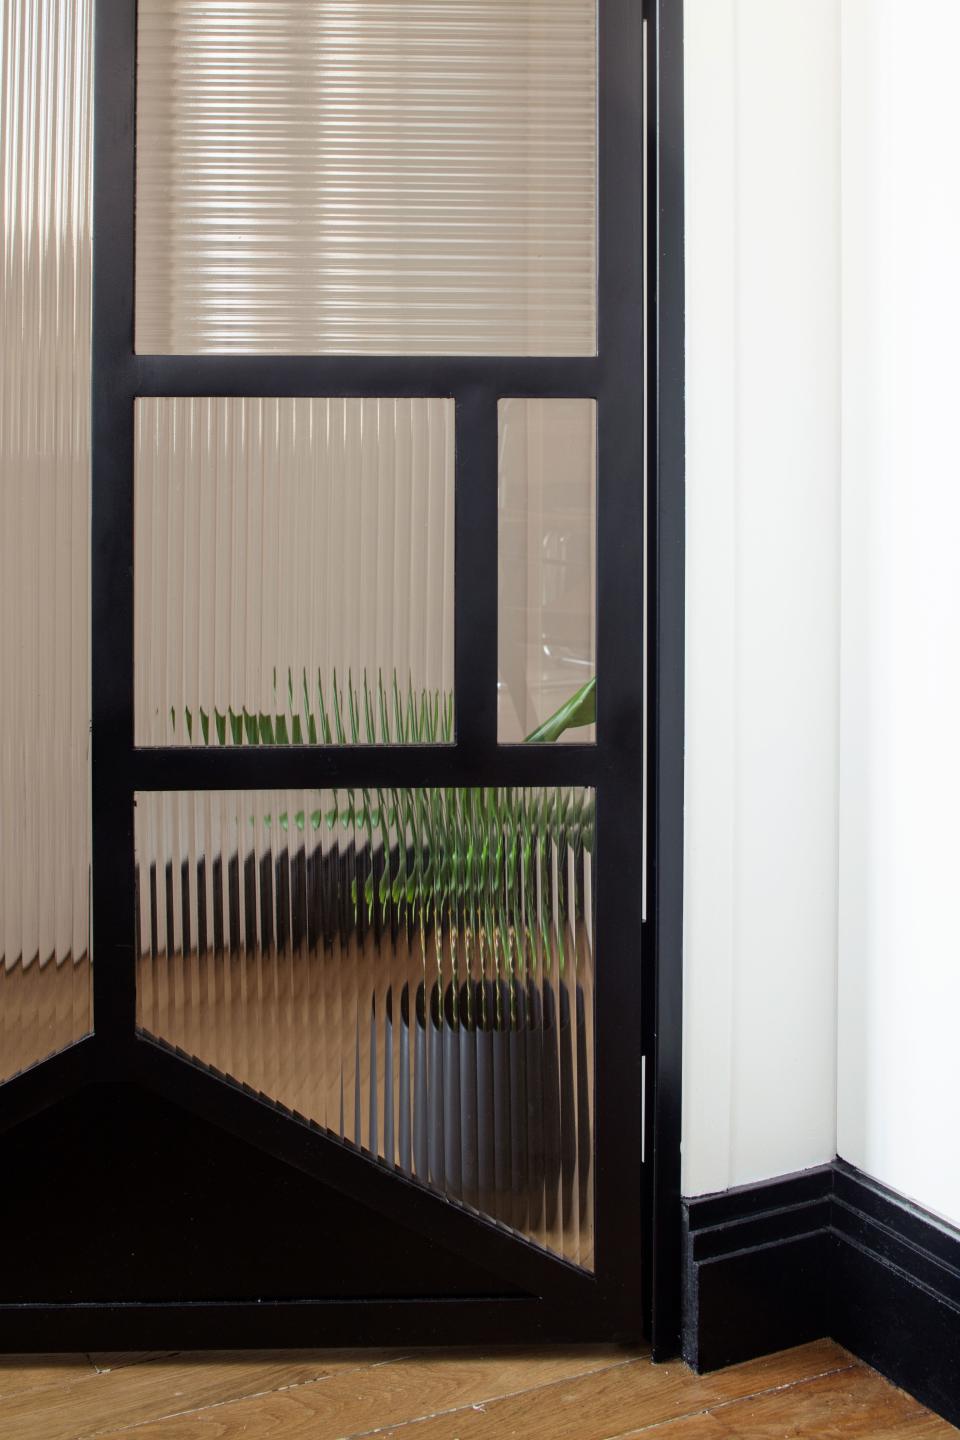 Glass doors brighten areas that otherwise don’t see much sunlight.